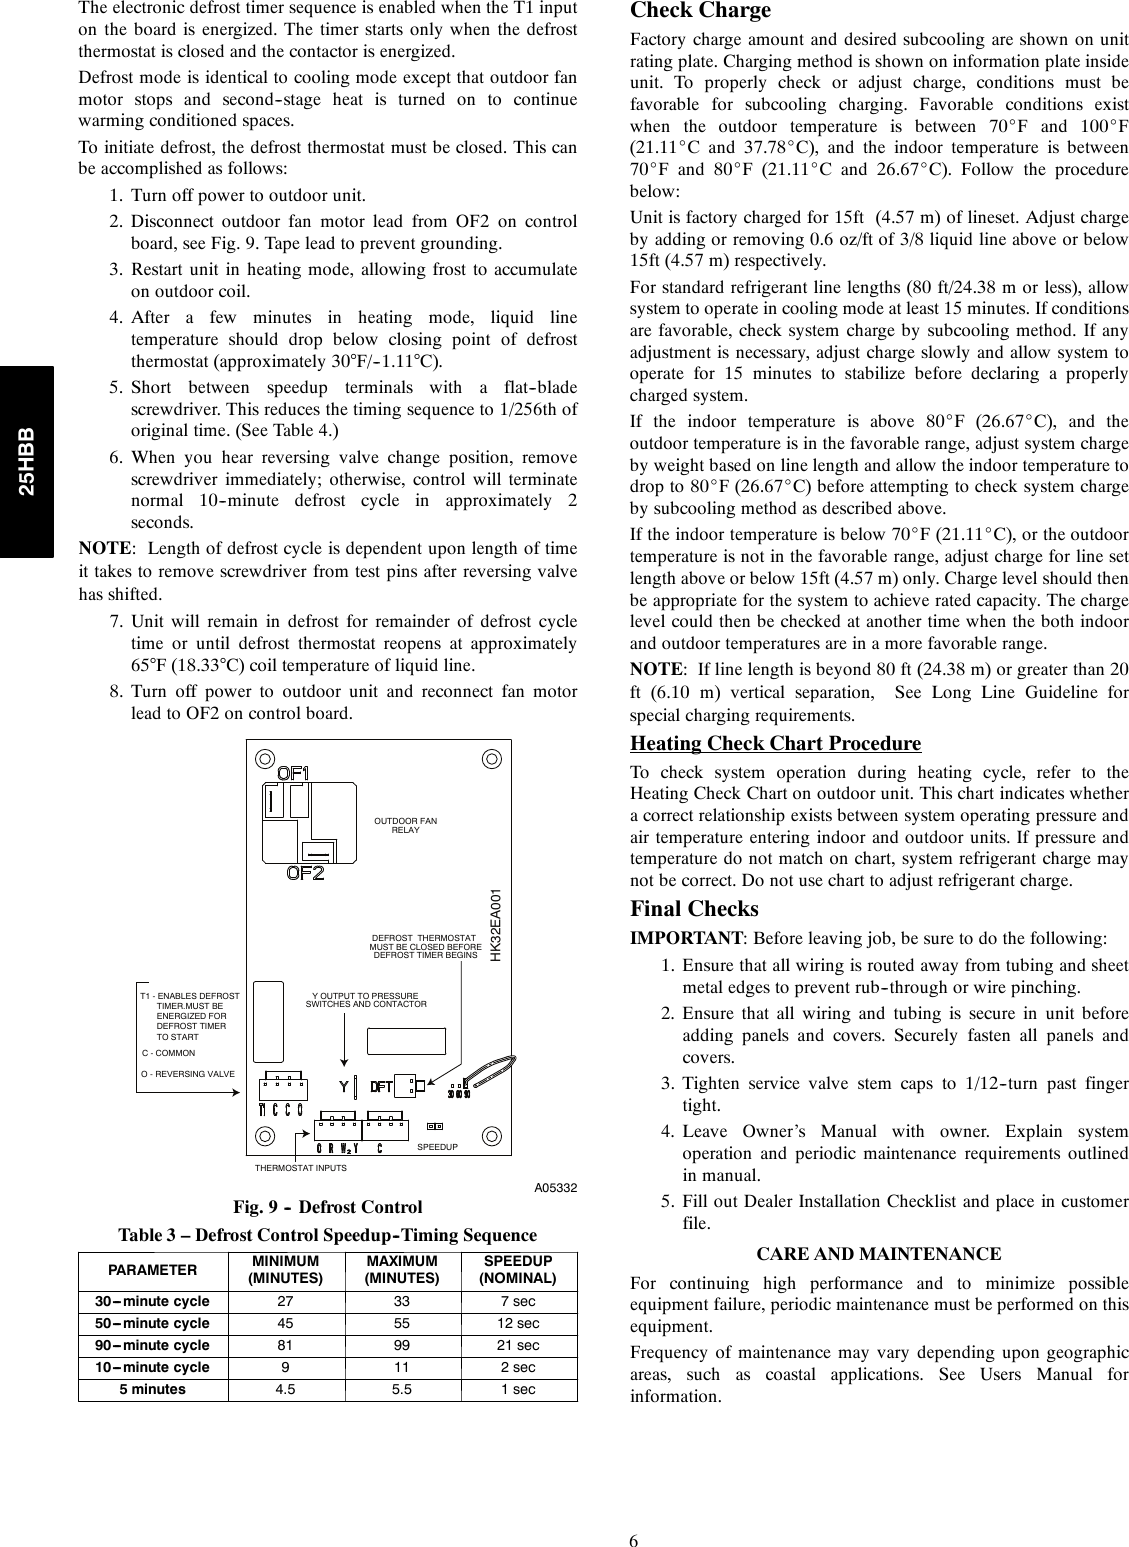 Page 6 of 8 - Carrier Carrier-25Hbb-Users-Manual- 25hbb-1si  Carrier-25hbb-users-manual